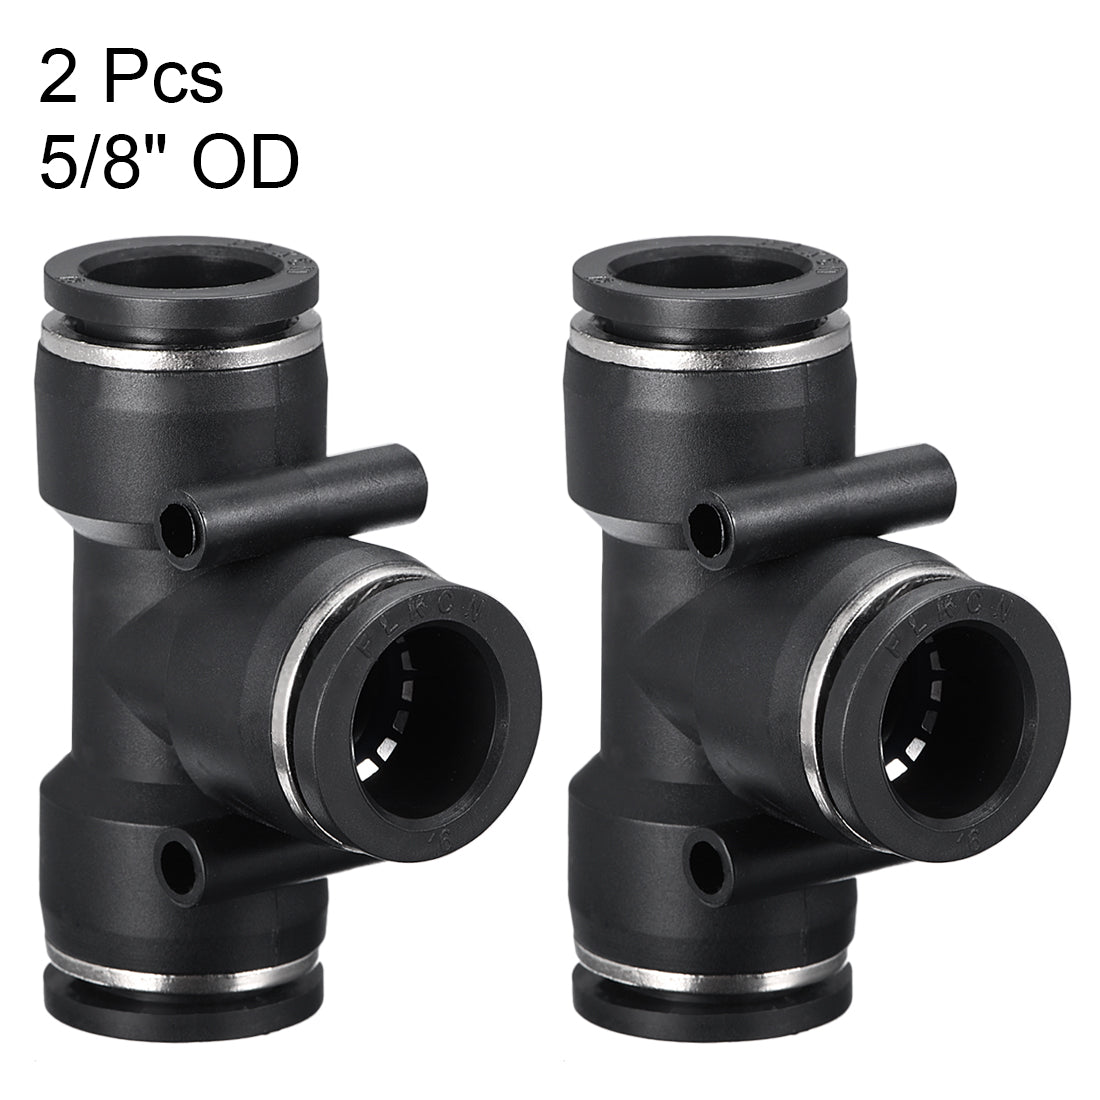 uxcell Uxcell 2 pcs Push To Connect Fittings T Type Tube Connect 16mm or 5/8" od Push Fit Fittings Tube Fittings Push Lock (16mm T tee)